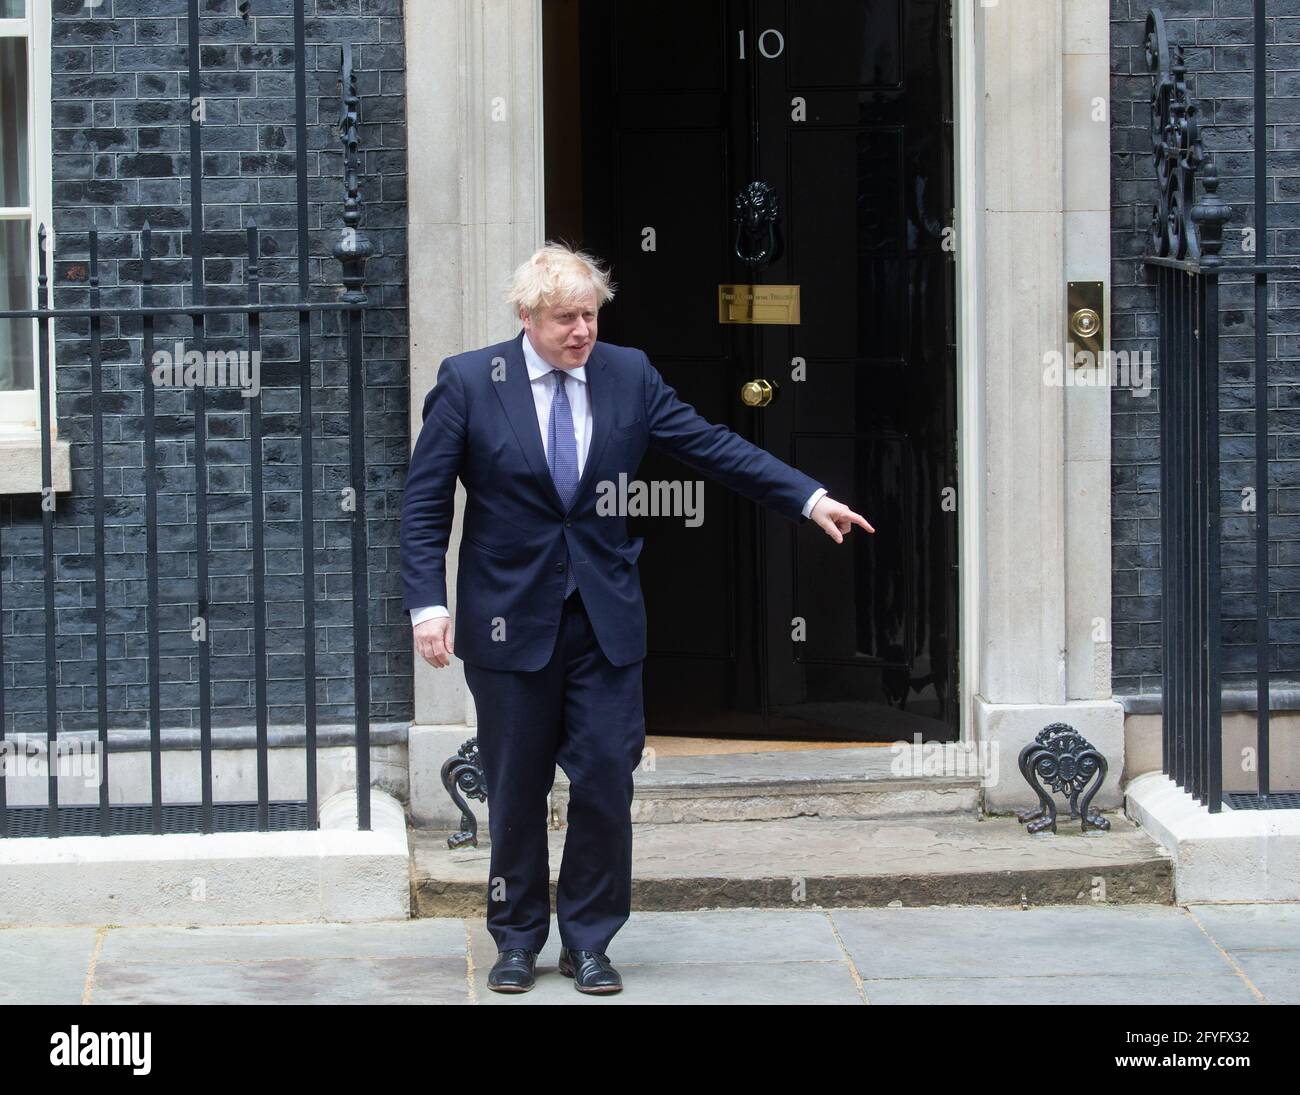 London, UK. 28th May, 2021. Viktor Orban, Prime Minister of Hungary, arrives at Number 10 for a meeting with Boris Johnson. Orban is known for his contentious views on migration, democrarcy and LGBTQ issues. Credit: Mark Thomas/Alamy Live News Stock Photo